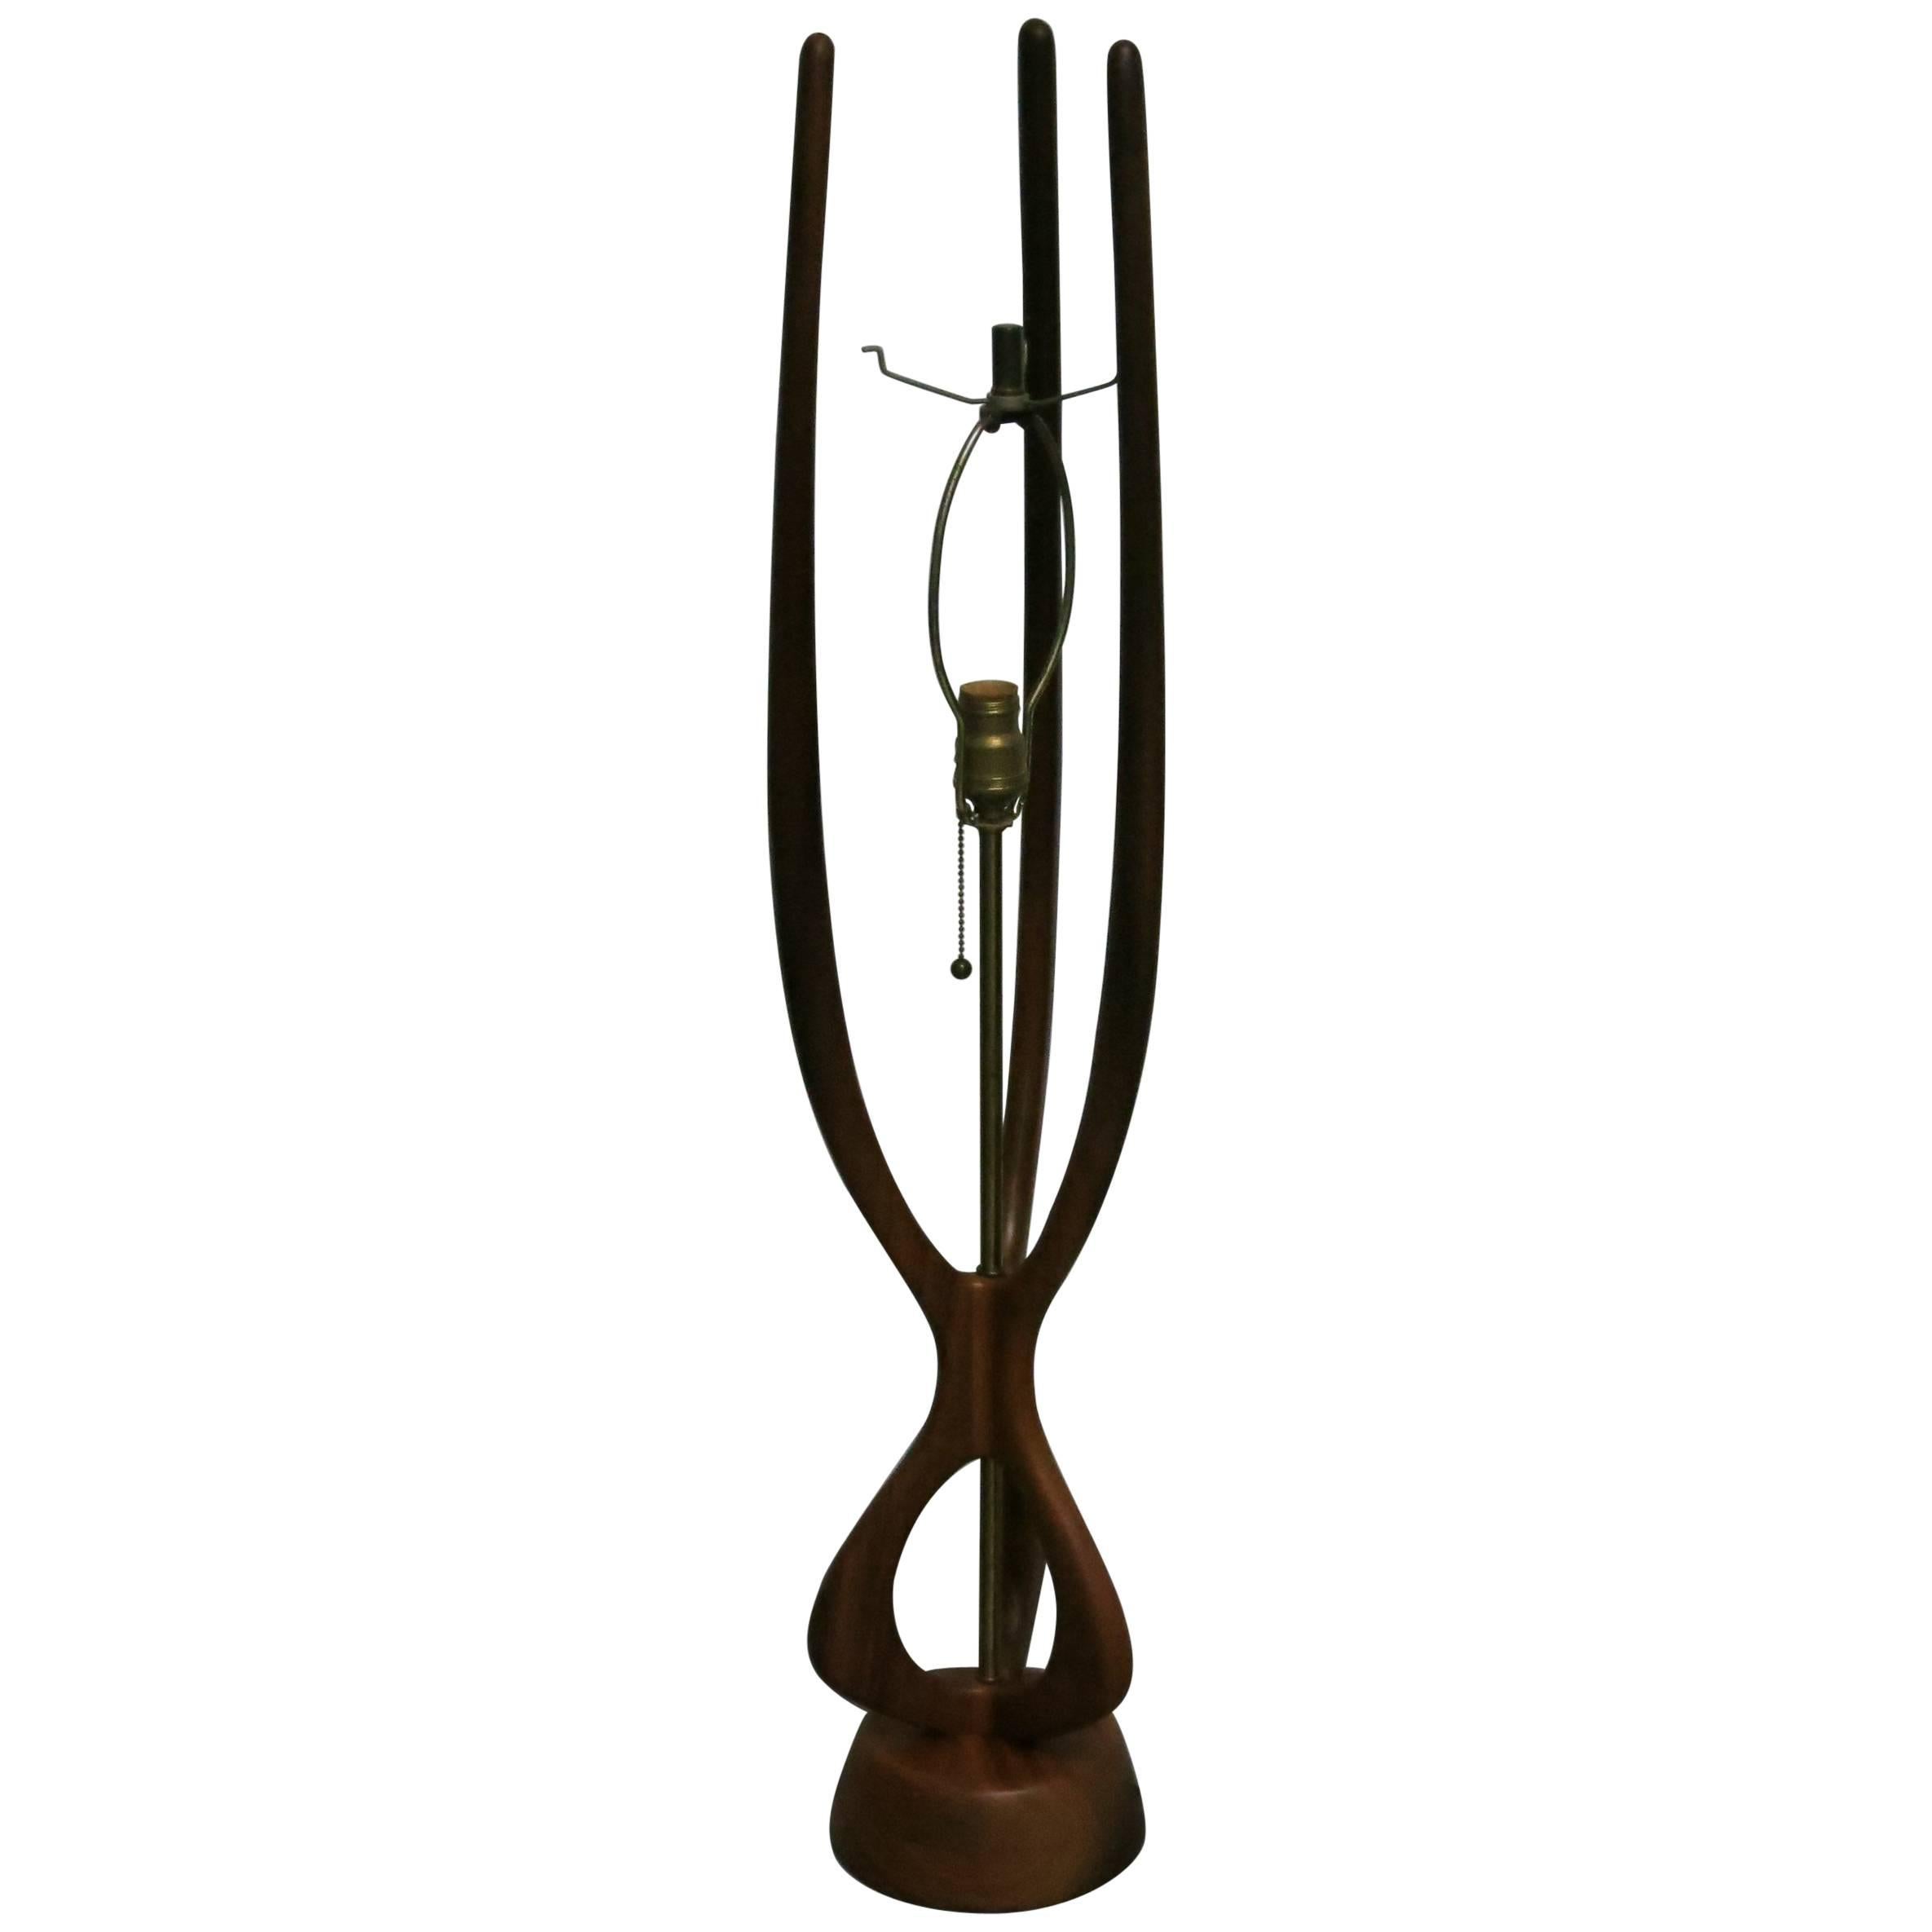 Danish Modern Adrian Pearsall Style Table Lamp For Sale